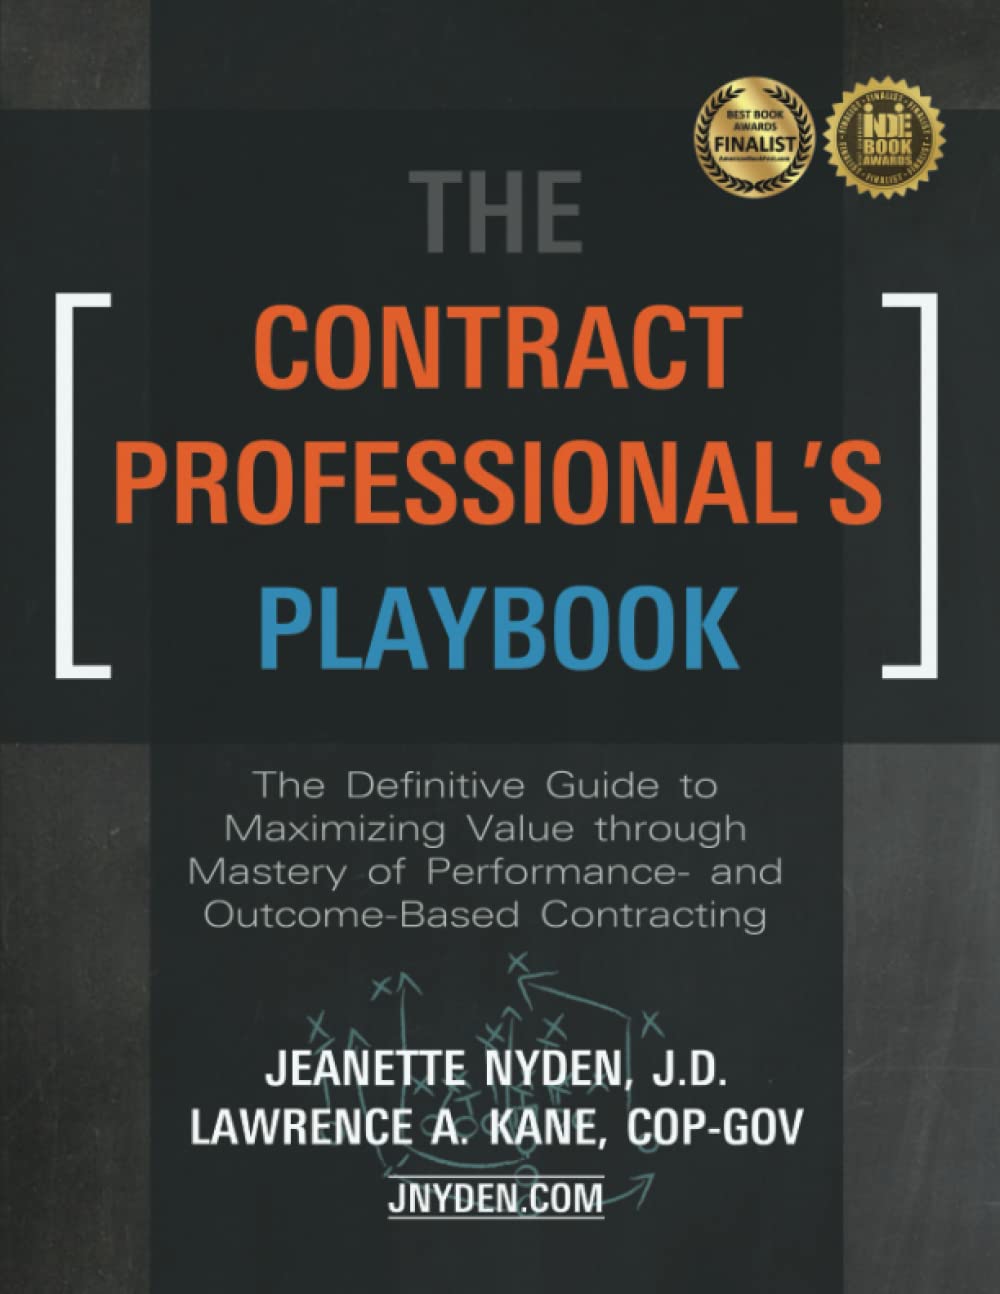 The Contract Professional's Playbook: The Definitive Guide to Maximizing through Master of Performance- and Outcome-Based Contracting